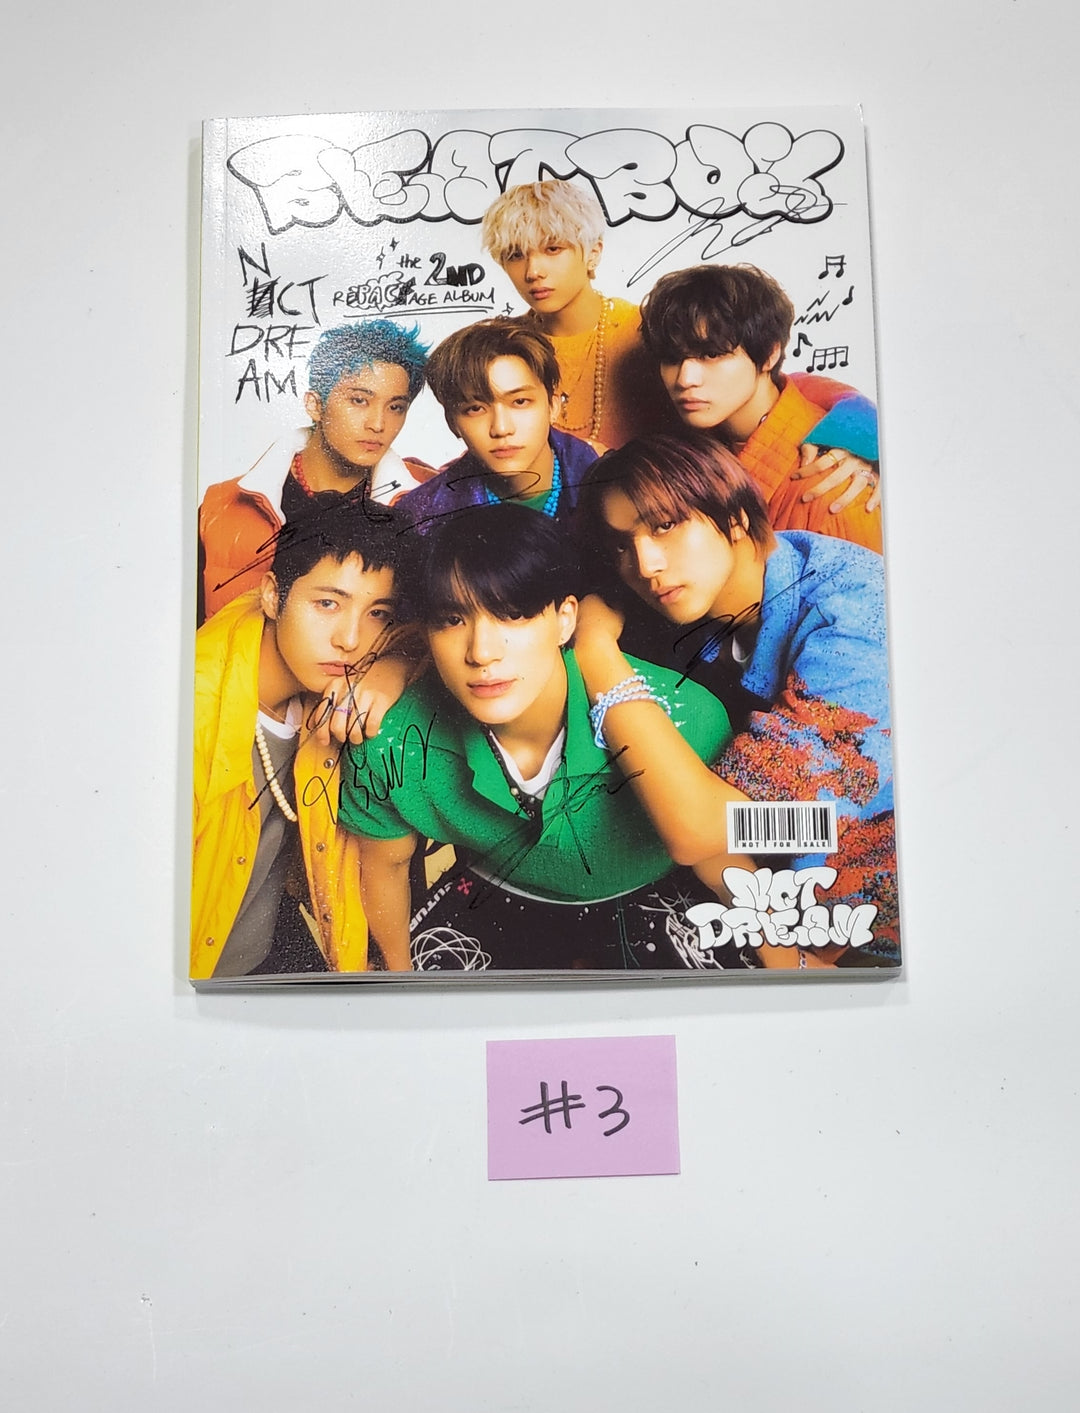 NCT Dream 'Beatbox' - Hand Autographed(Signed) Promo Album - Must Read!